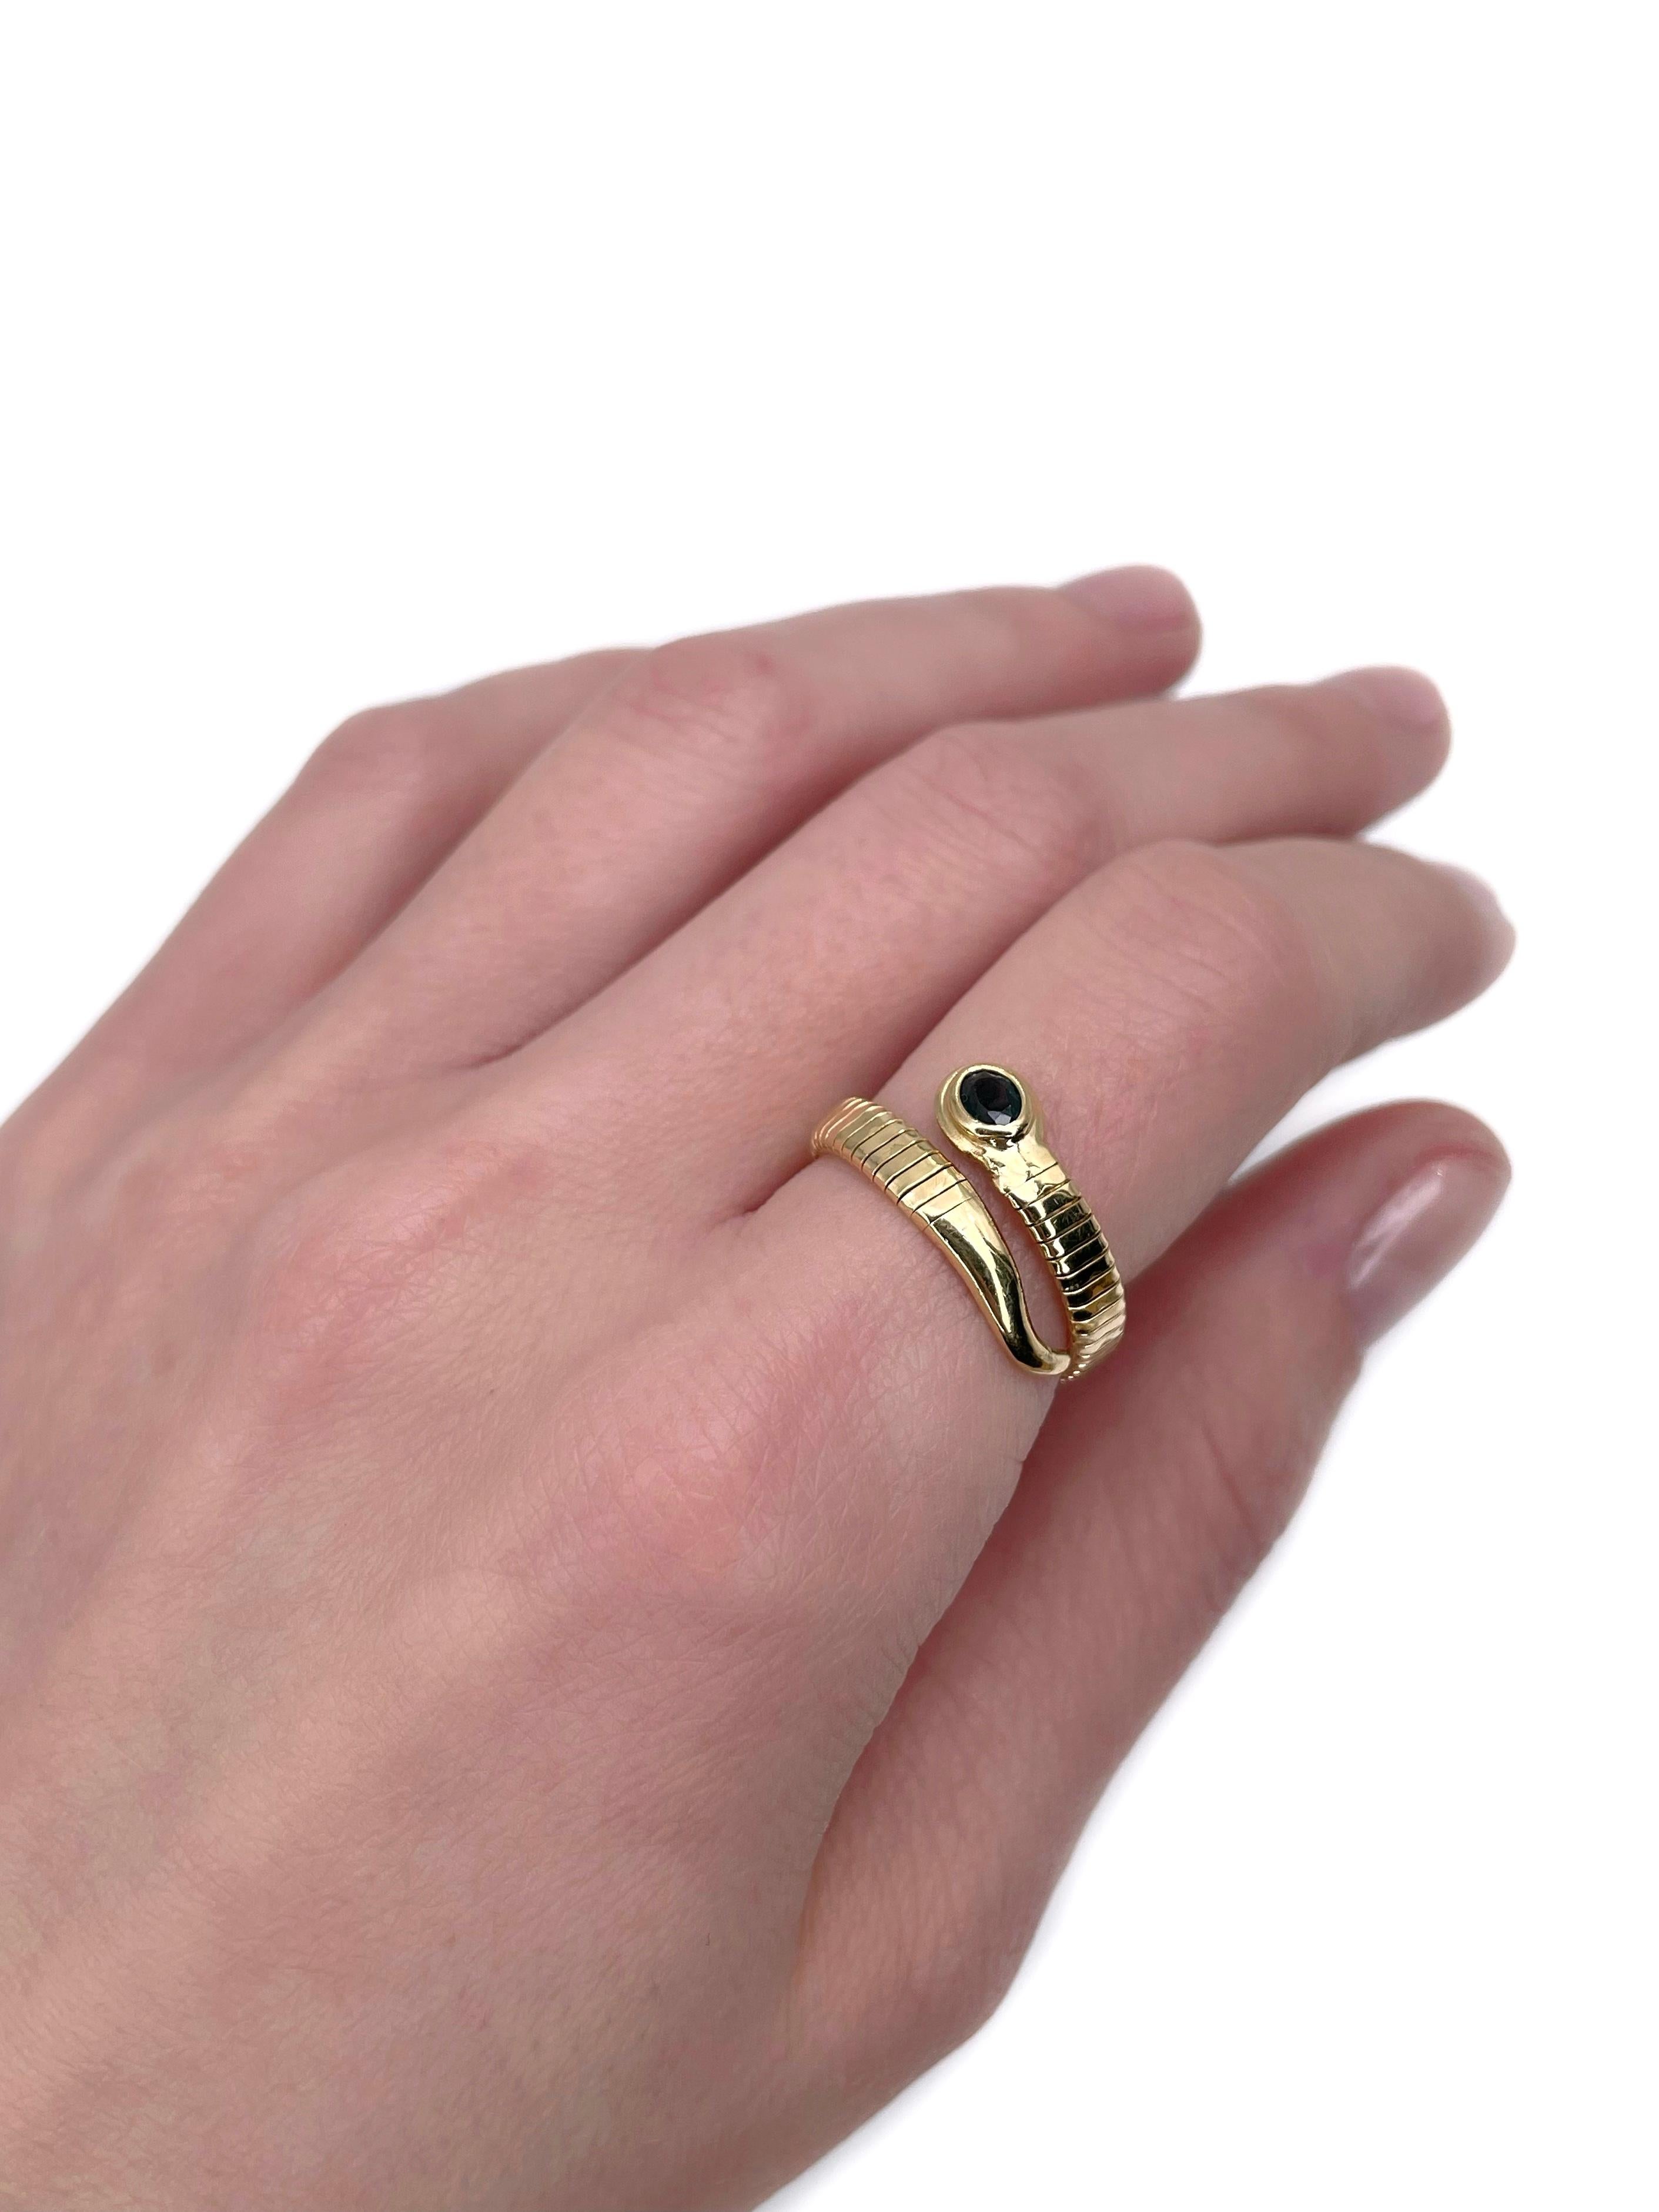 This is a vintage flexible snake ring crafted in 18K yellow gold. Circa 1980. 

The piece features oval cut blue sapphire.

Weight: 4.60g
Size: ~17.75 (US ~7.5)

———

If you have any questions, please feel free to ask. We describe our items